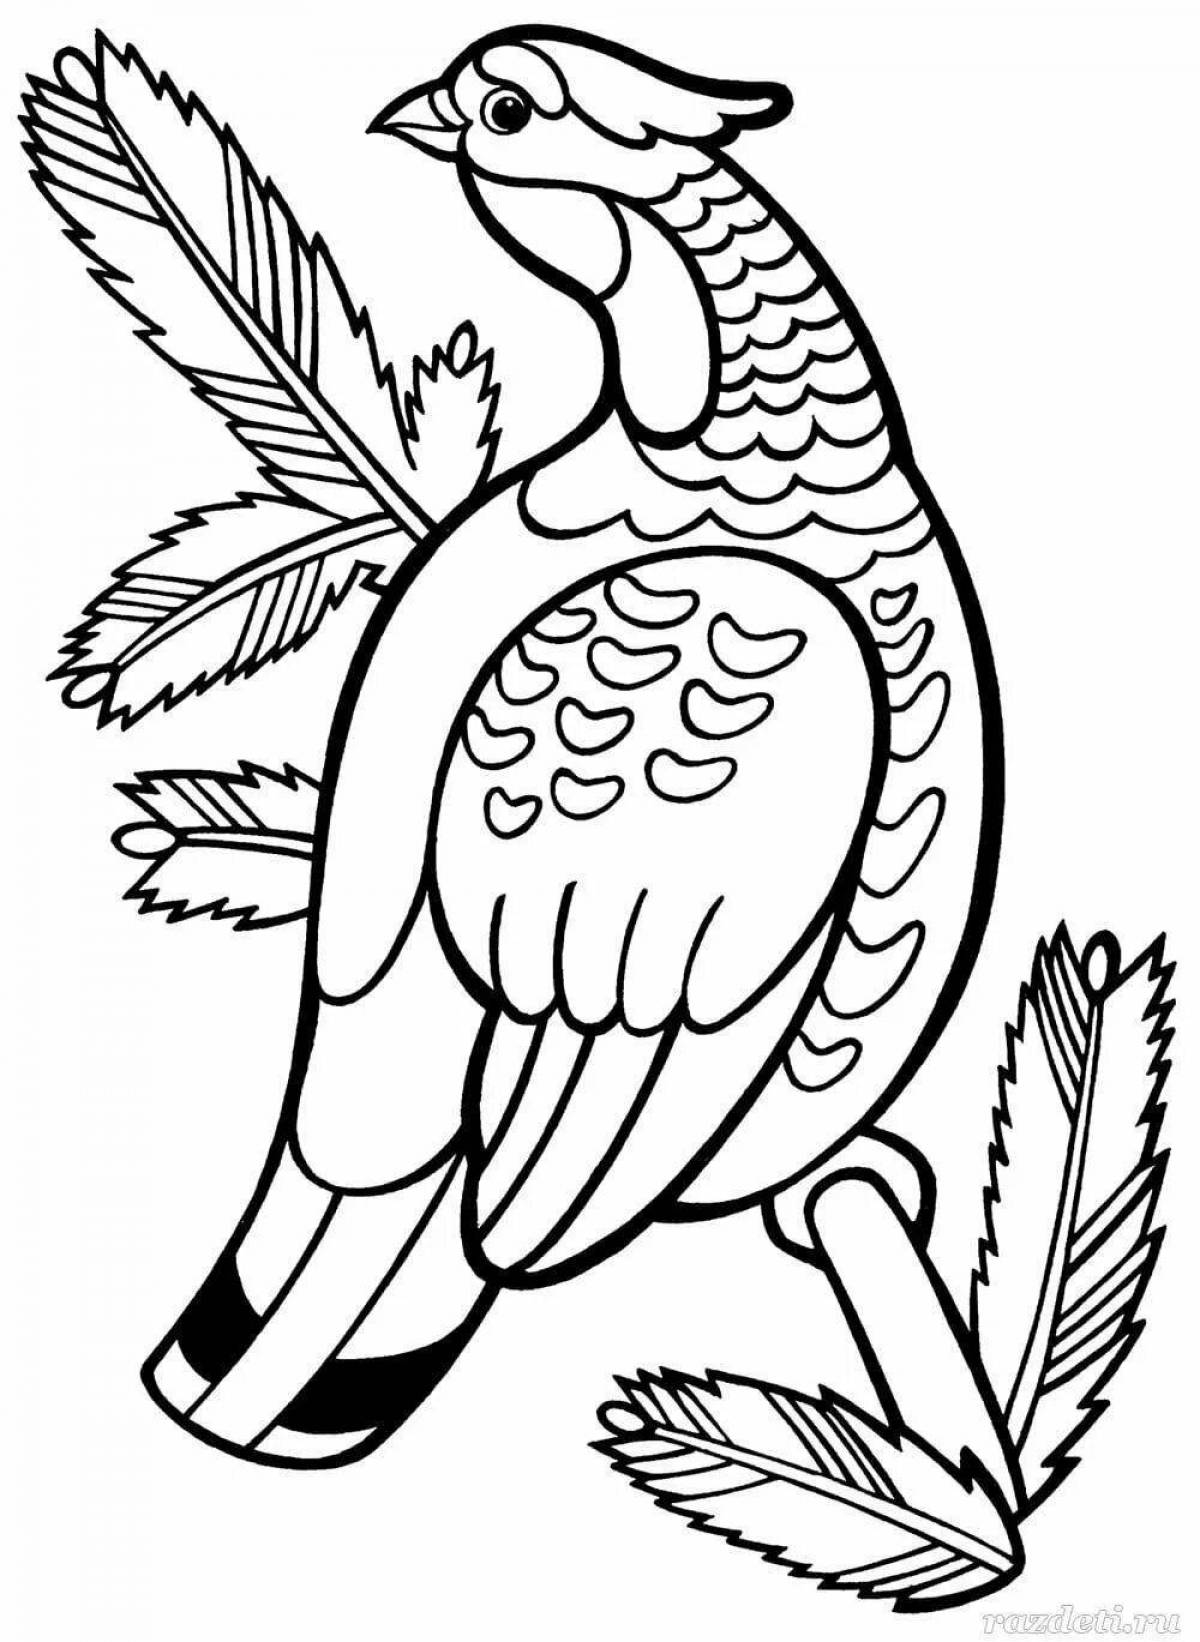 Fun capercaillie coloring book for kids